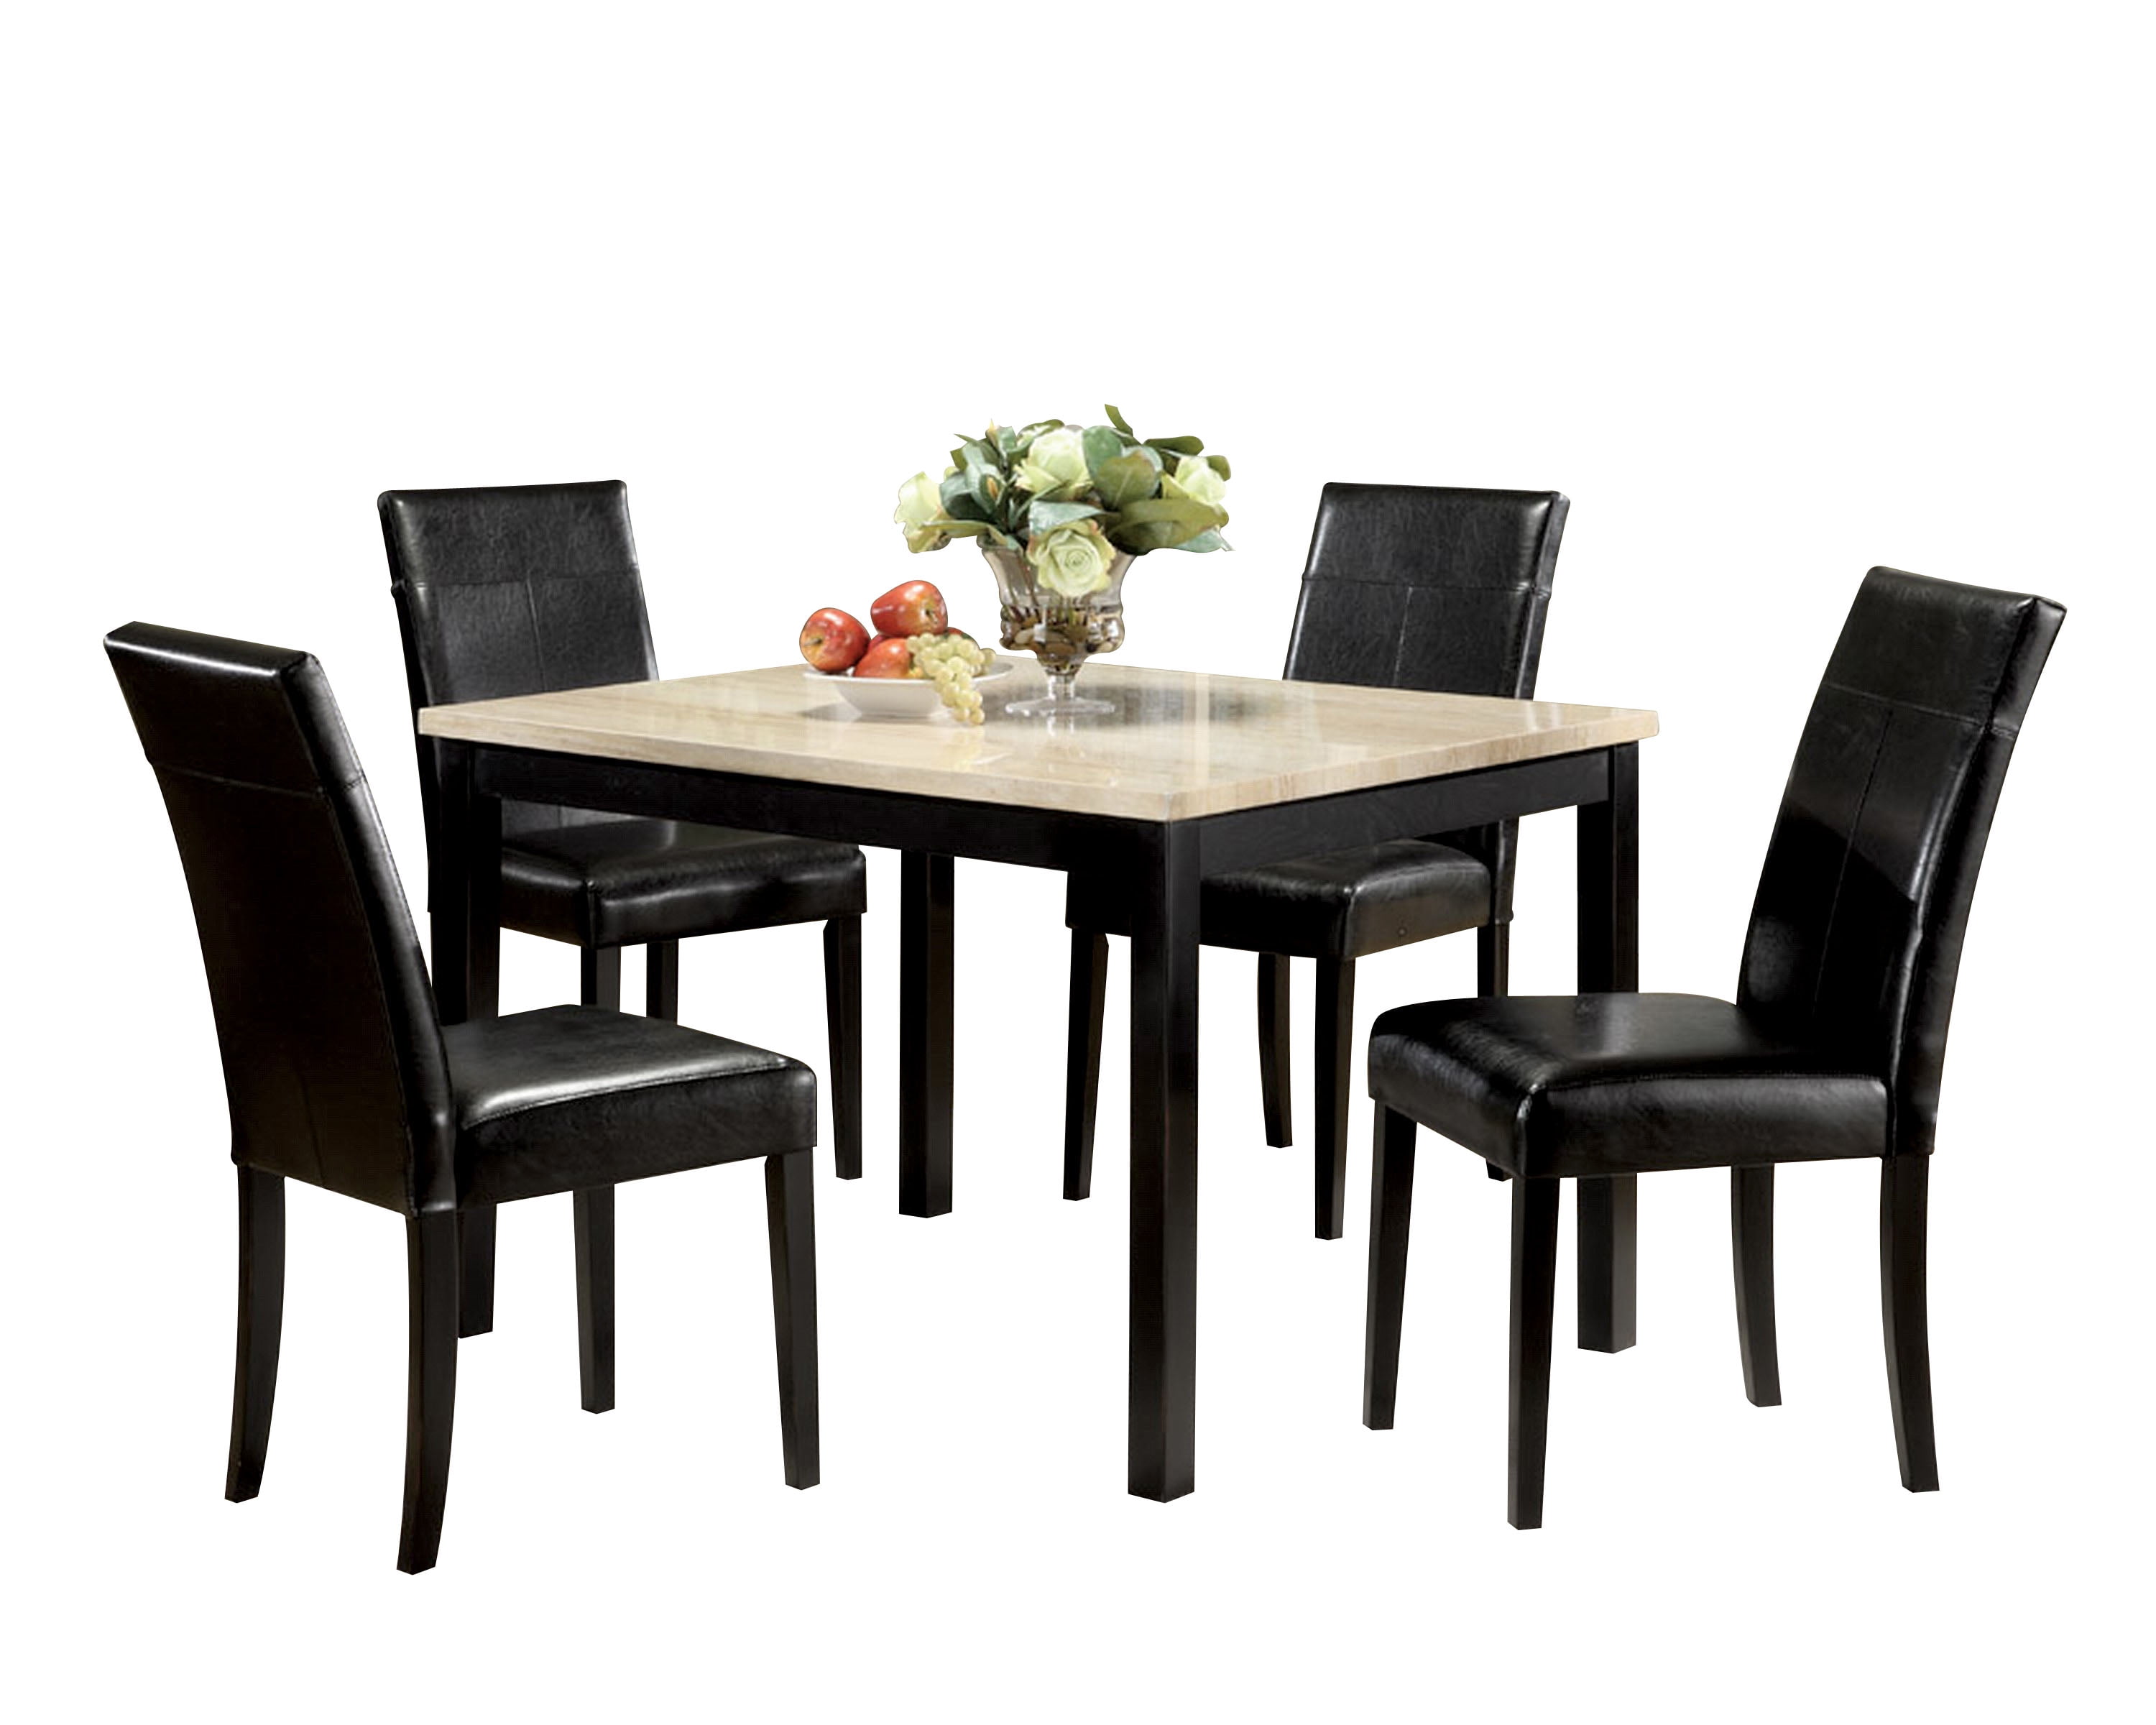 ACME Portland 5-Piece Pack Dining Set, Brown Faux Marble & Cherry ...